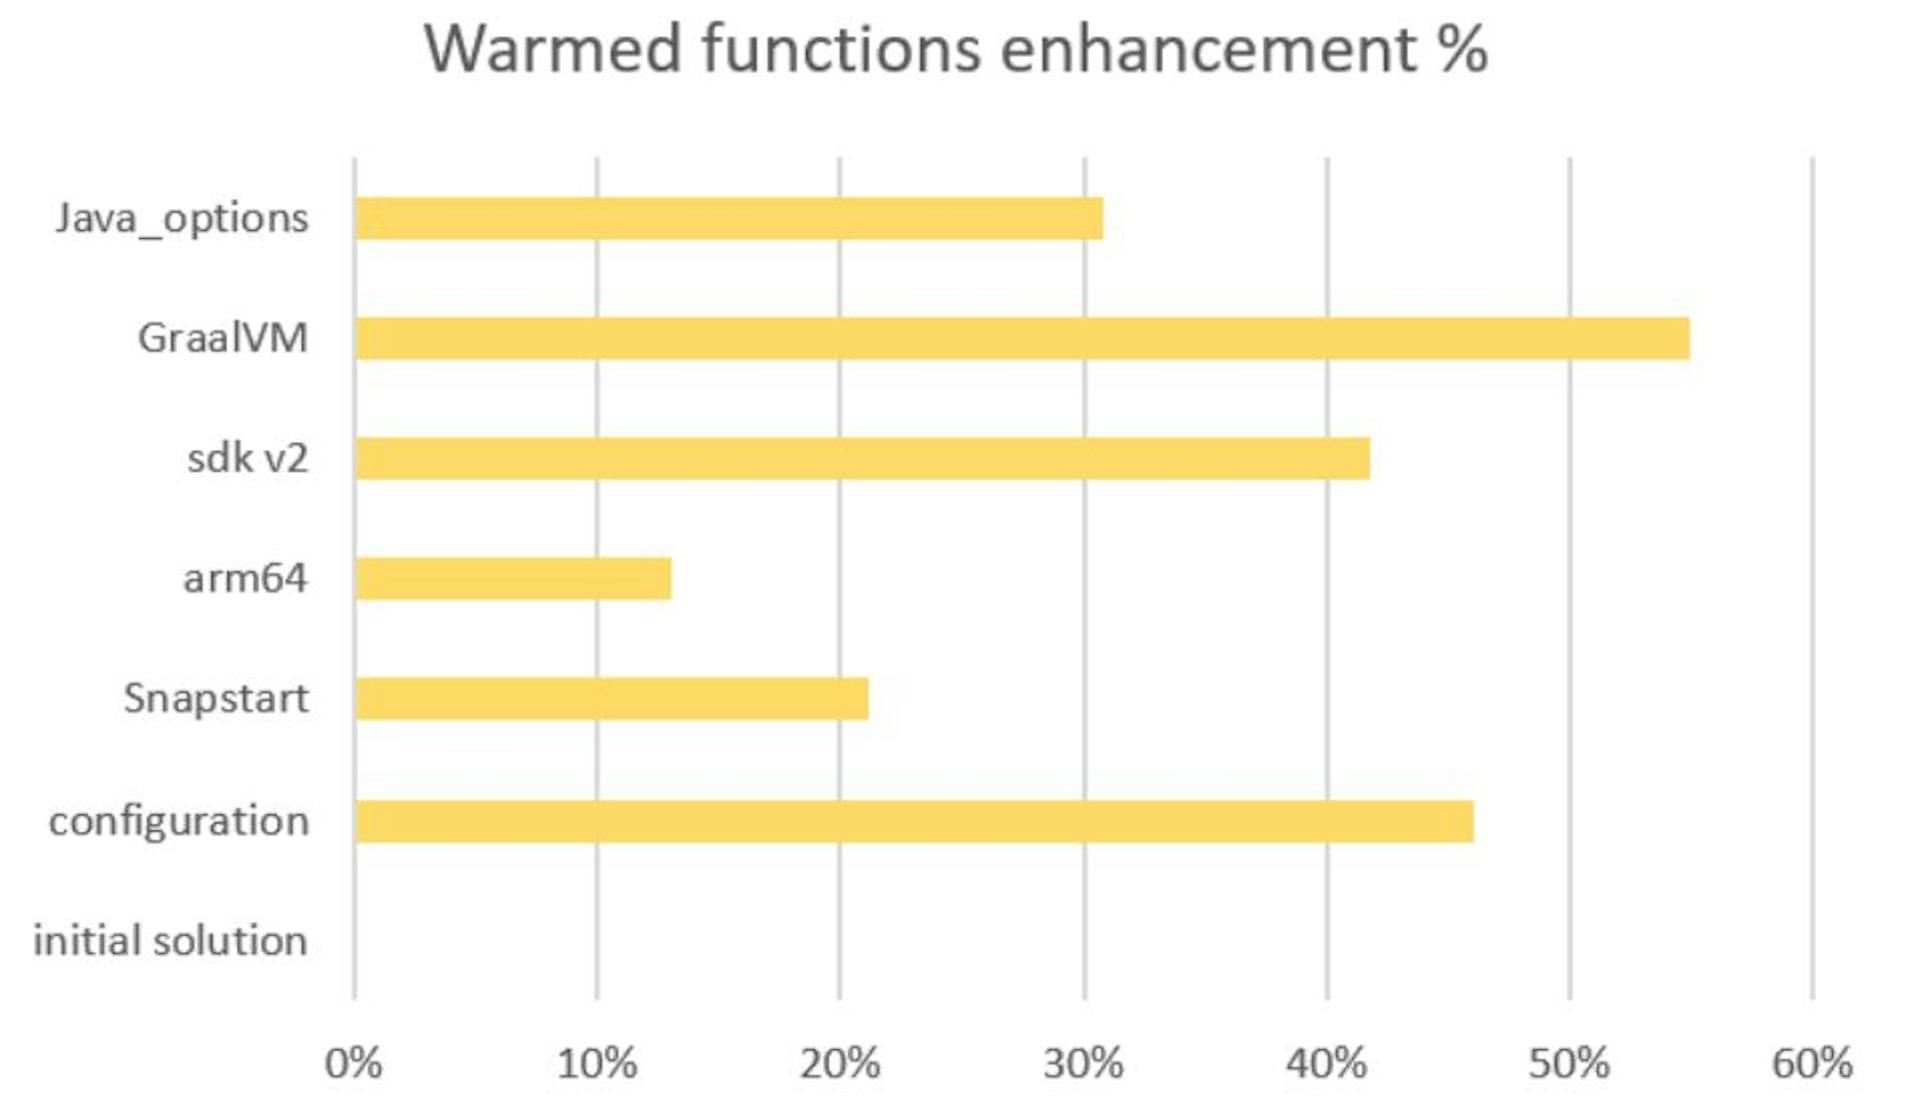 Fig. 5. Warmed function enhancement by approach %